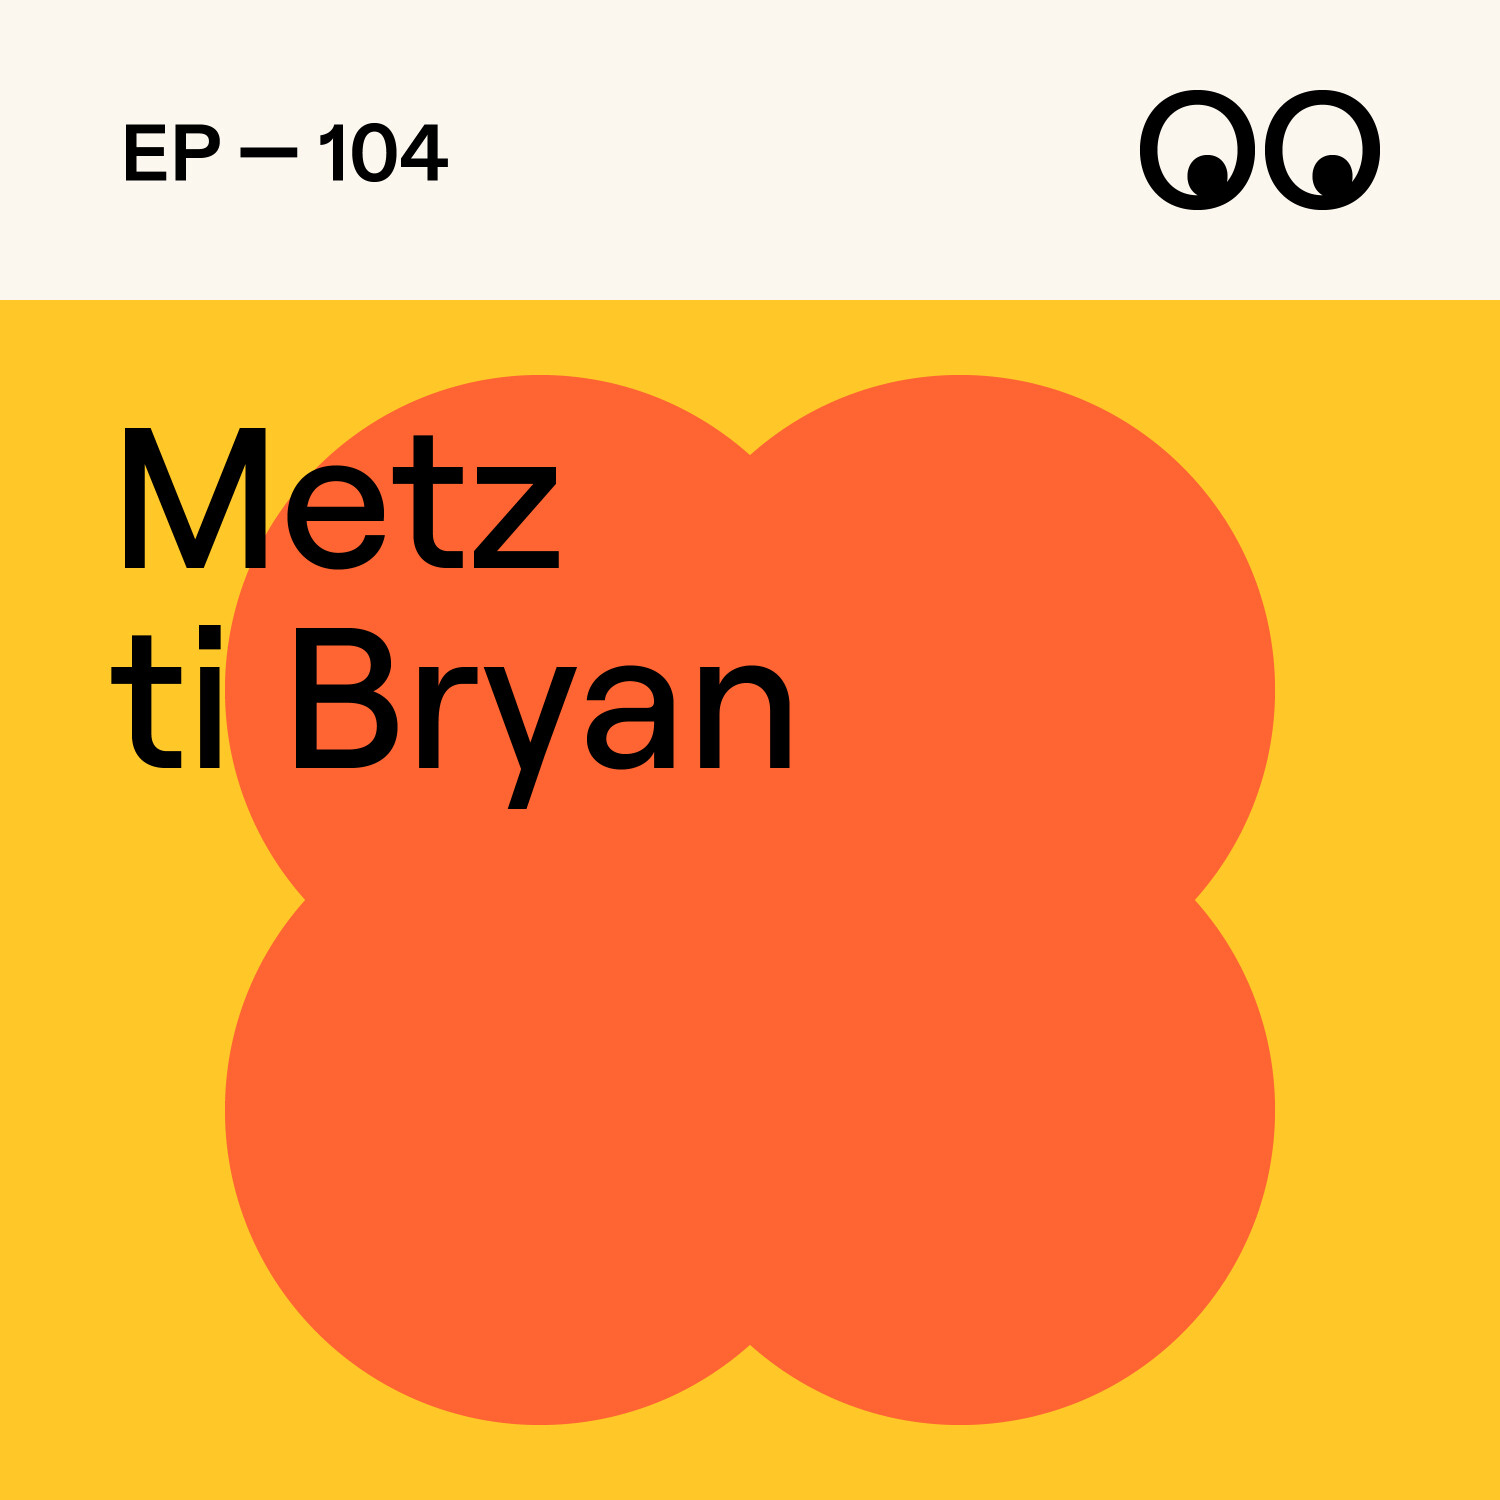 The importance of embracing change, with Metz ti Bryan